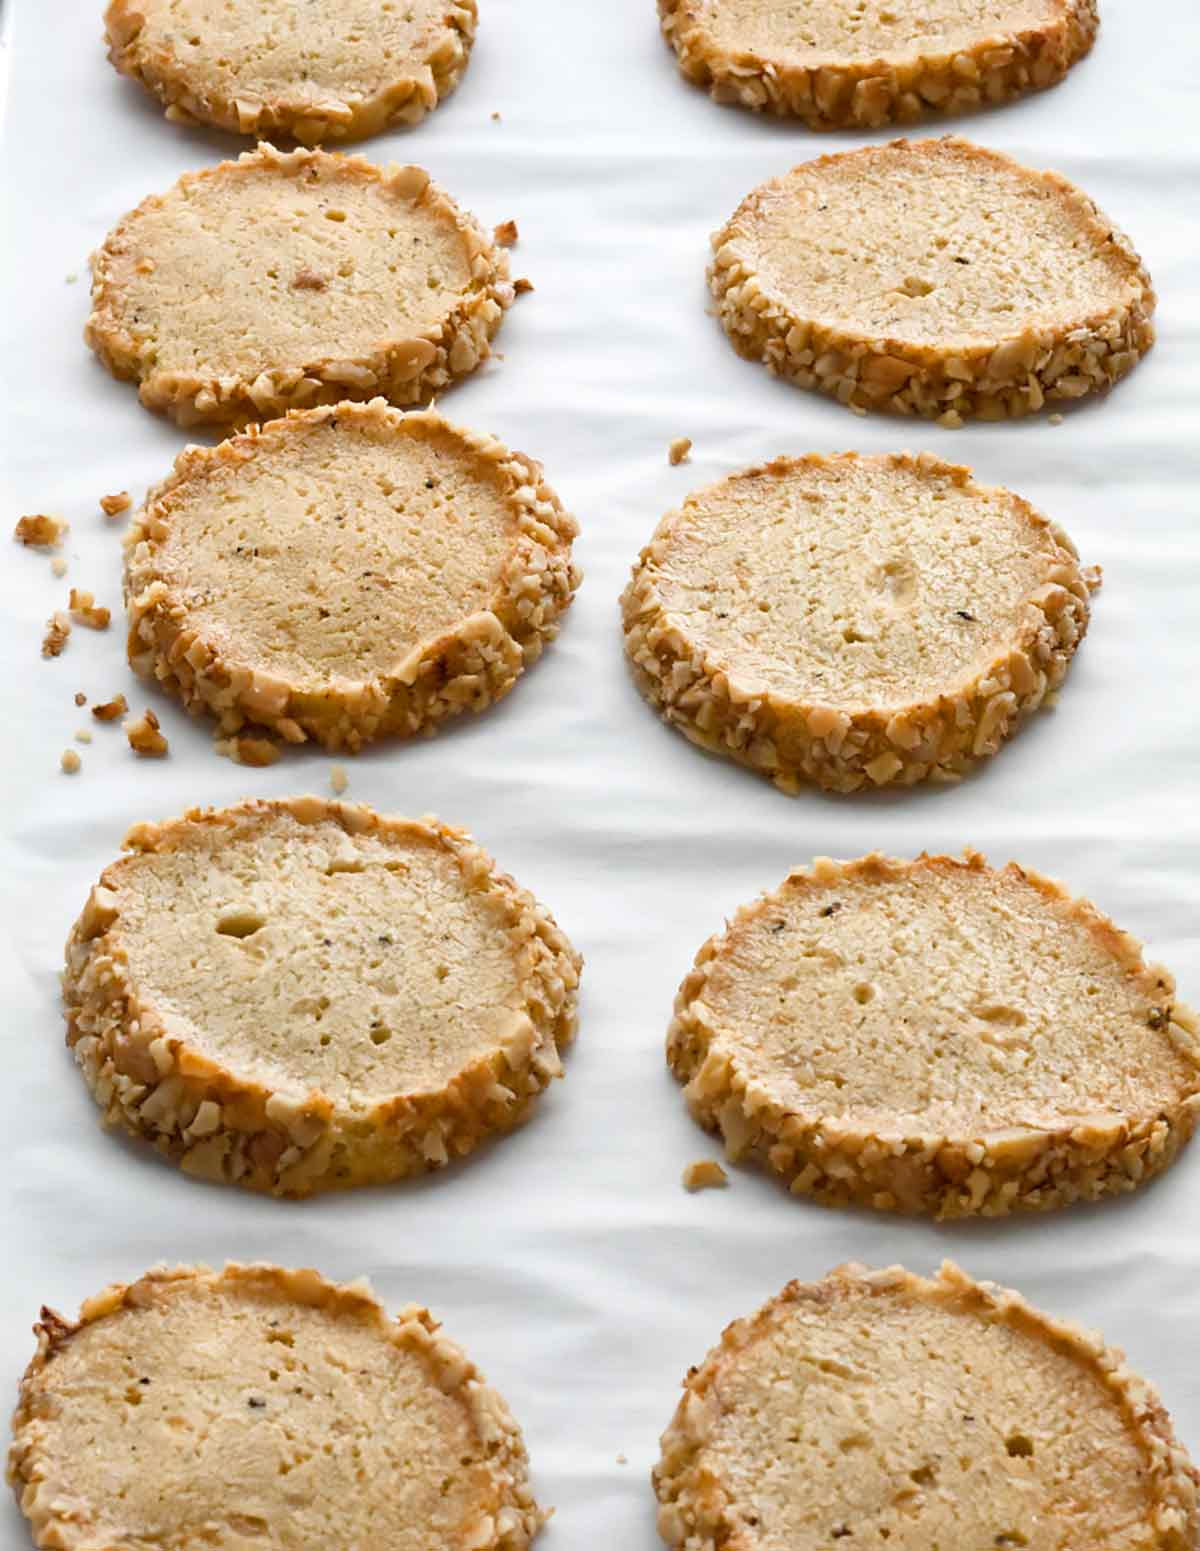 Ten Stilton and walnut crackers arranged in rows on a sheet of parchment.